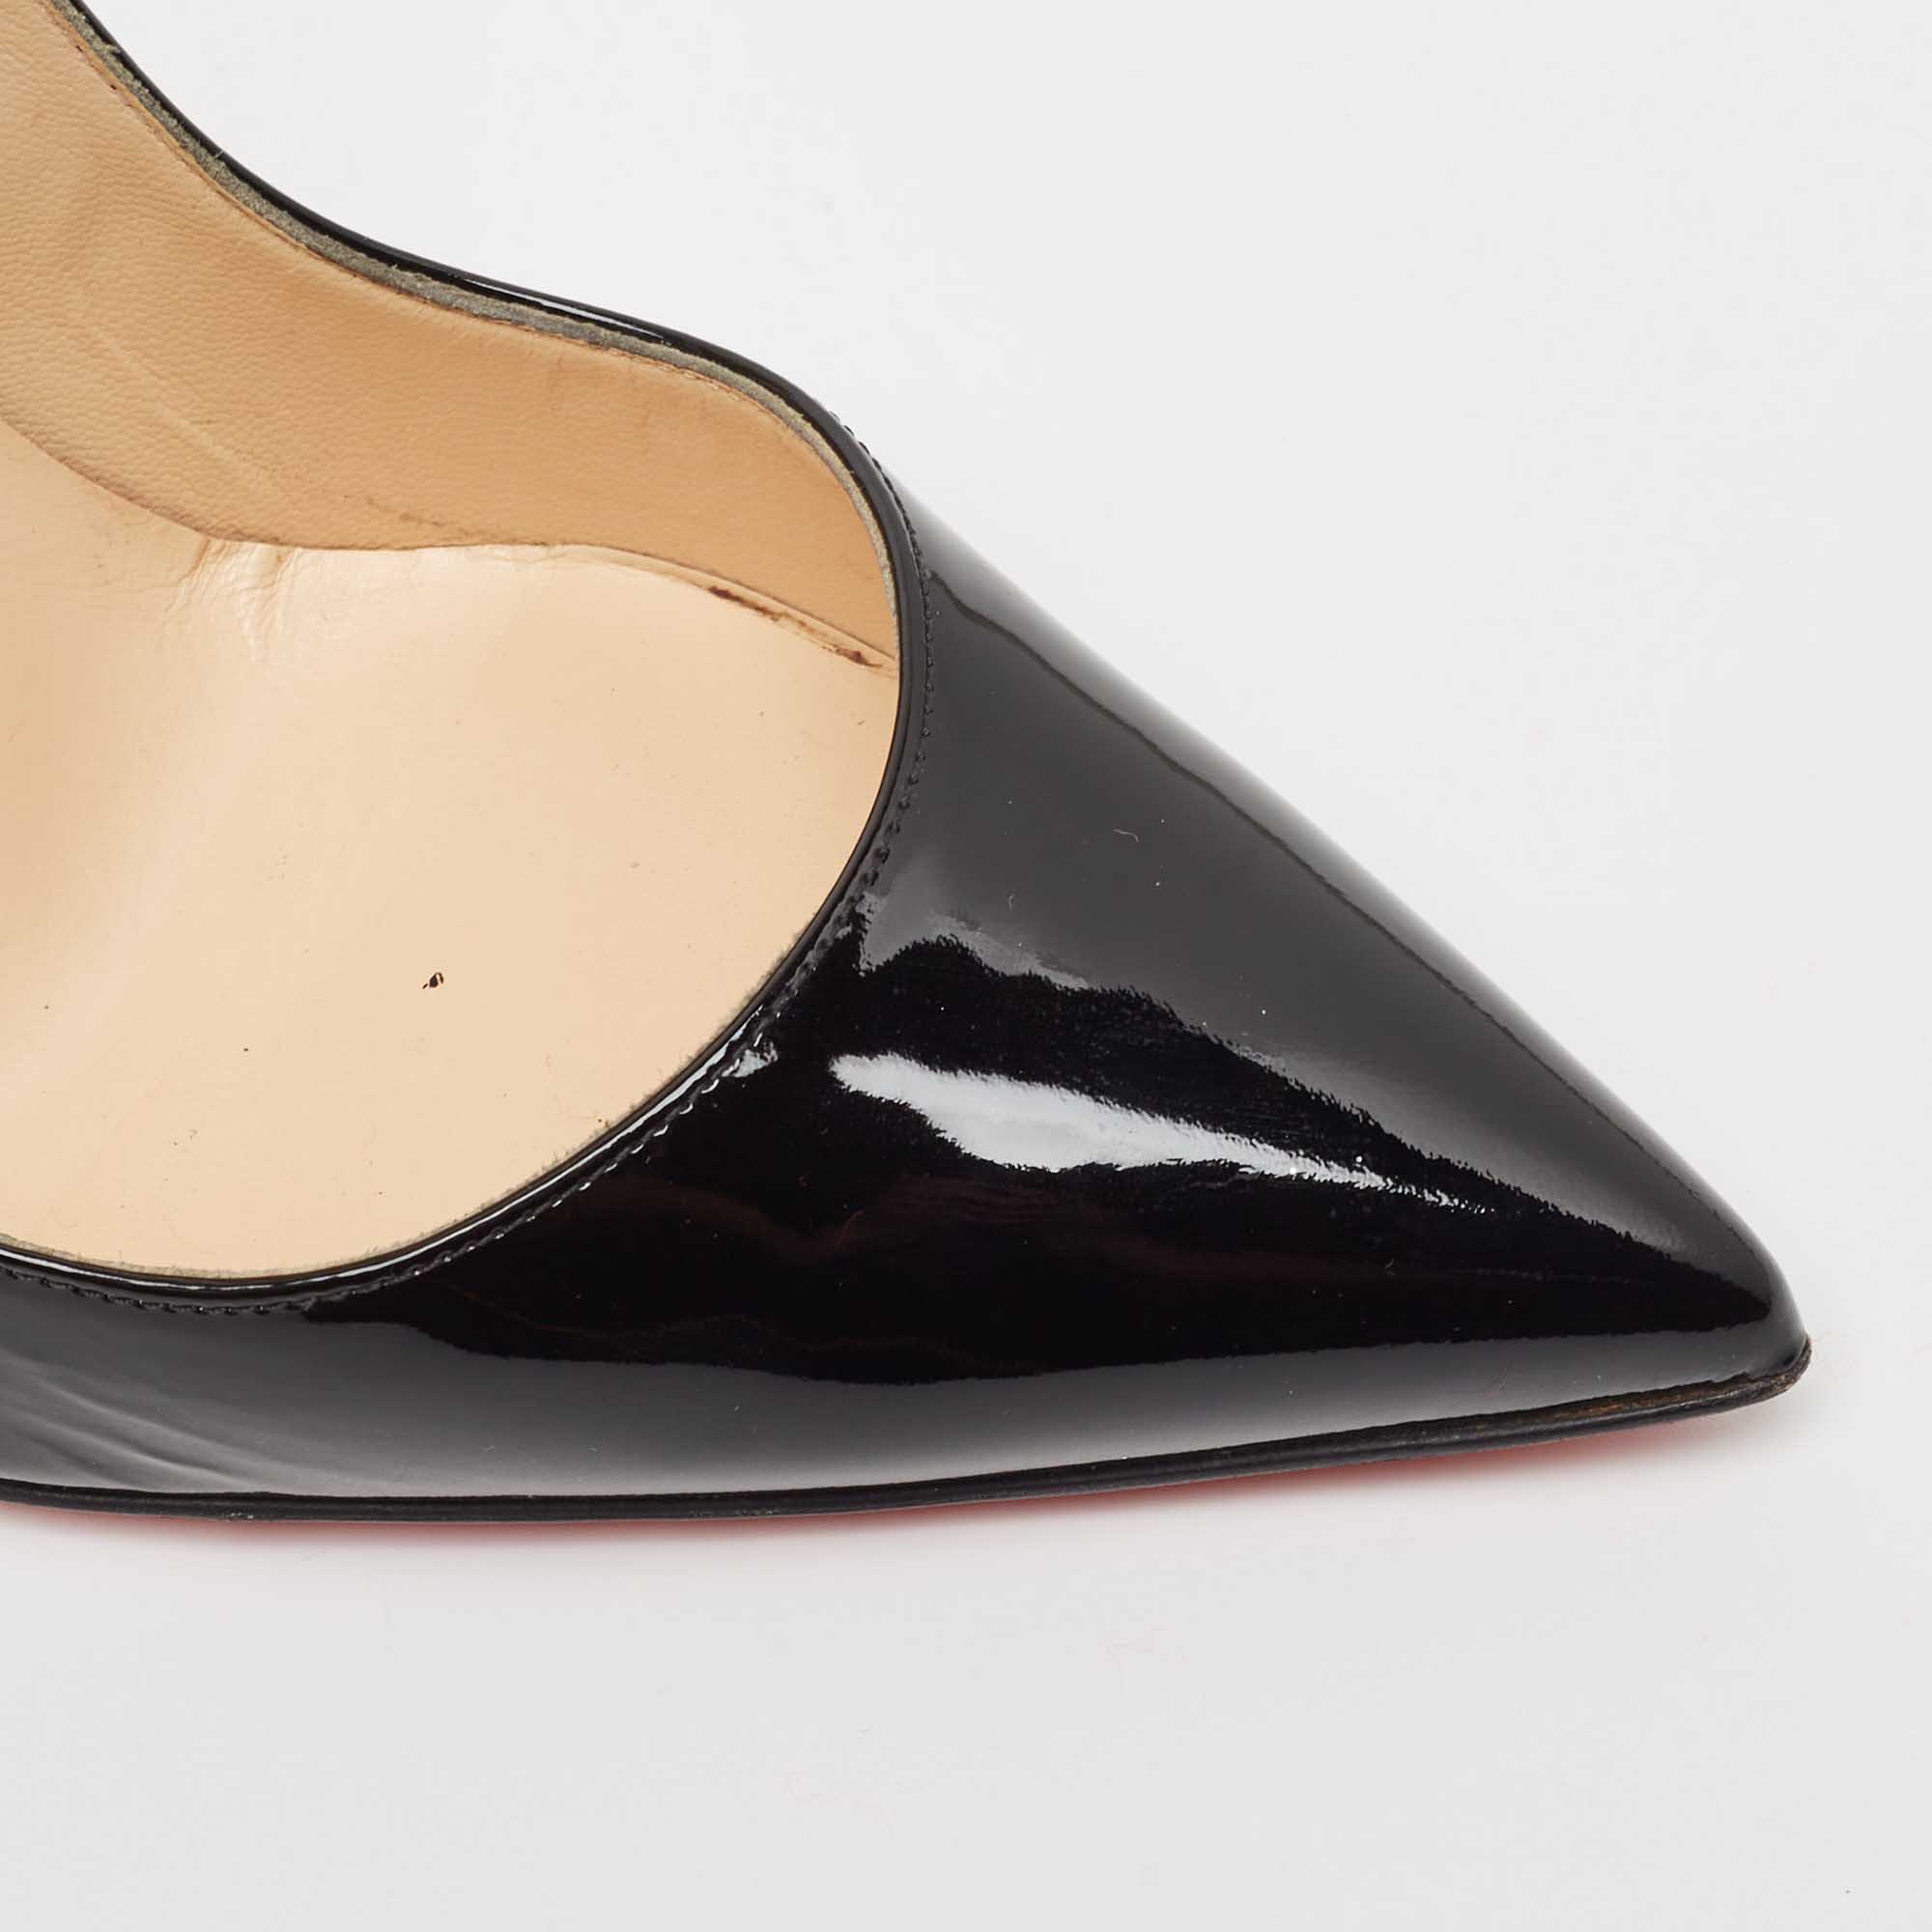 Christian Louboutin Black Patent Leather So Kate Pointed Toe Pumps Size 36.5